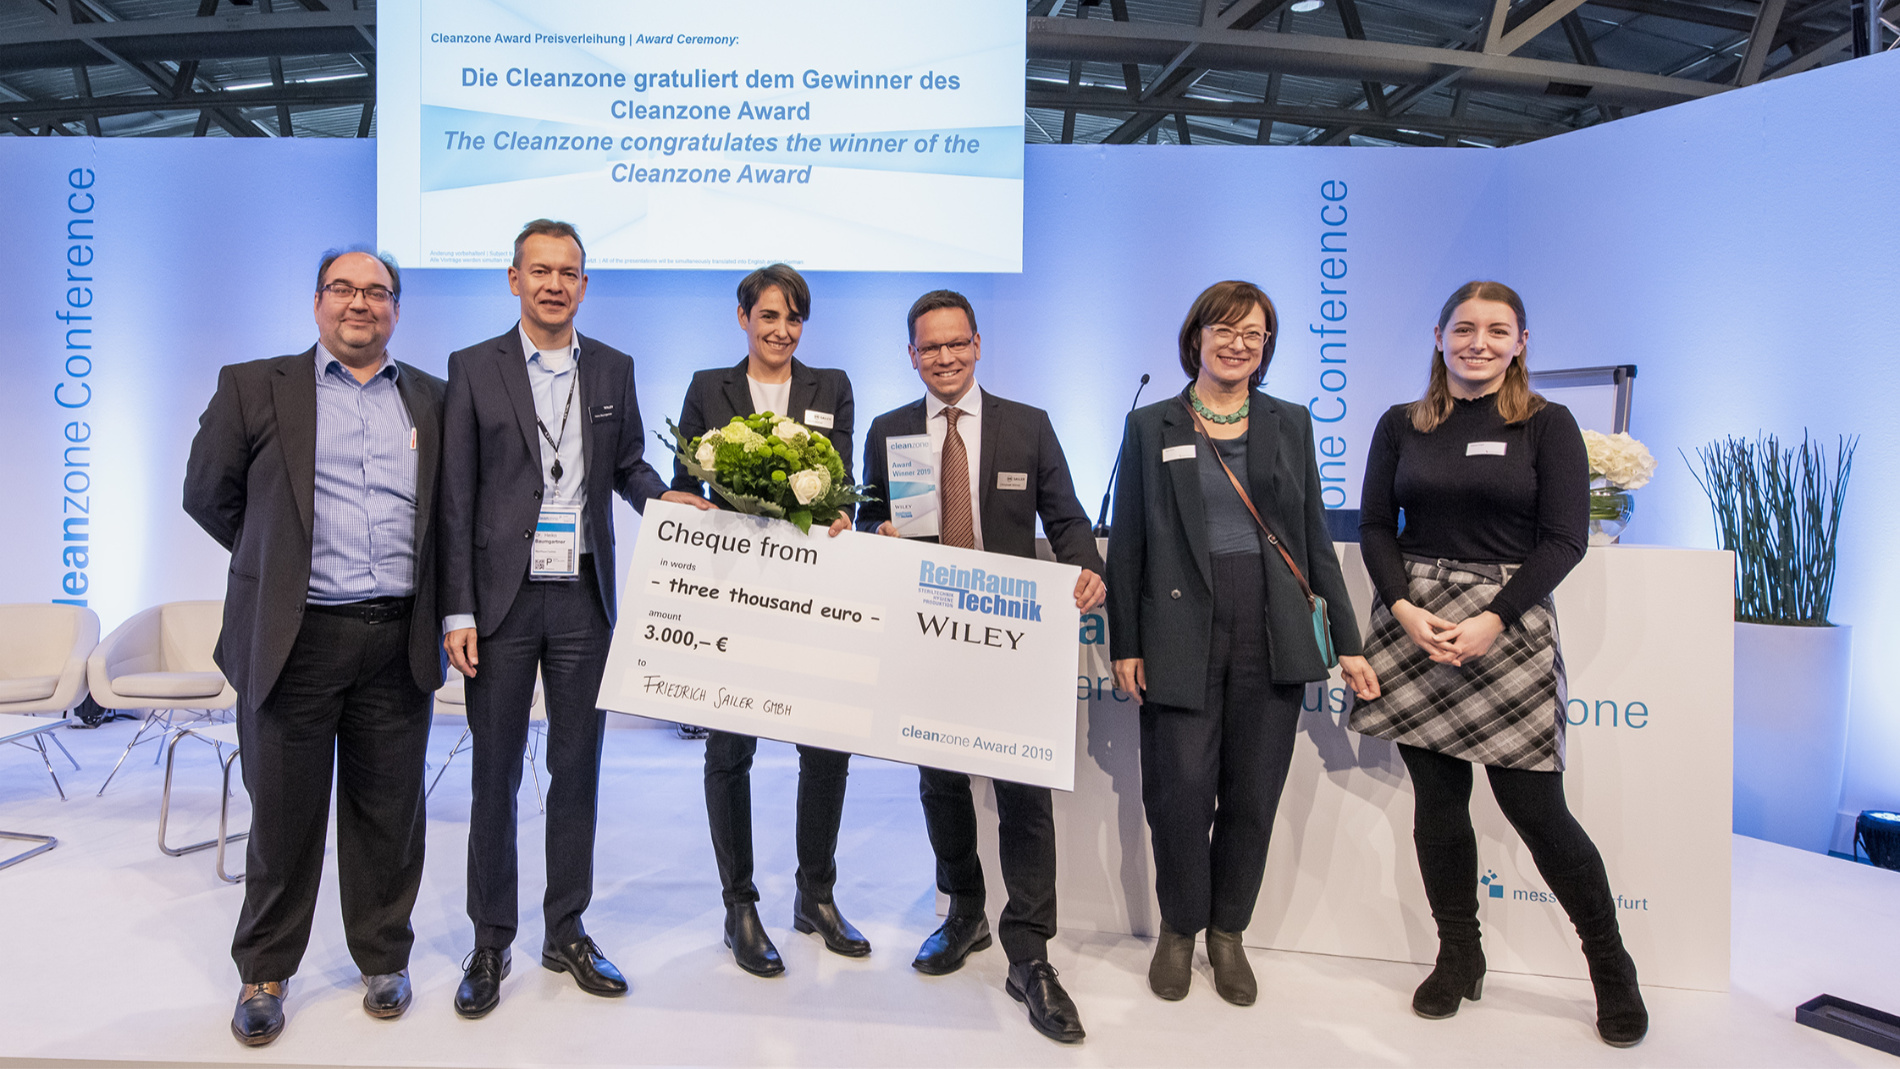 The Cleanzone Award is presented to innovations in cleanroom technology.  (Source: Messe Frankfurt Exhibition GmbH / Petra Welzel)